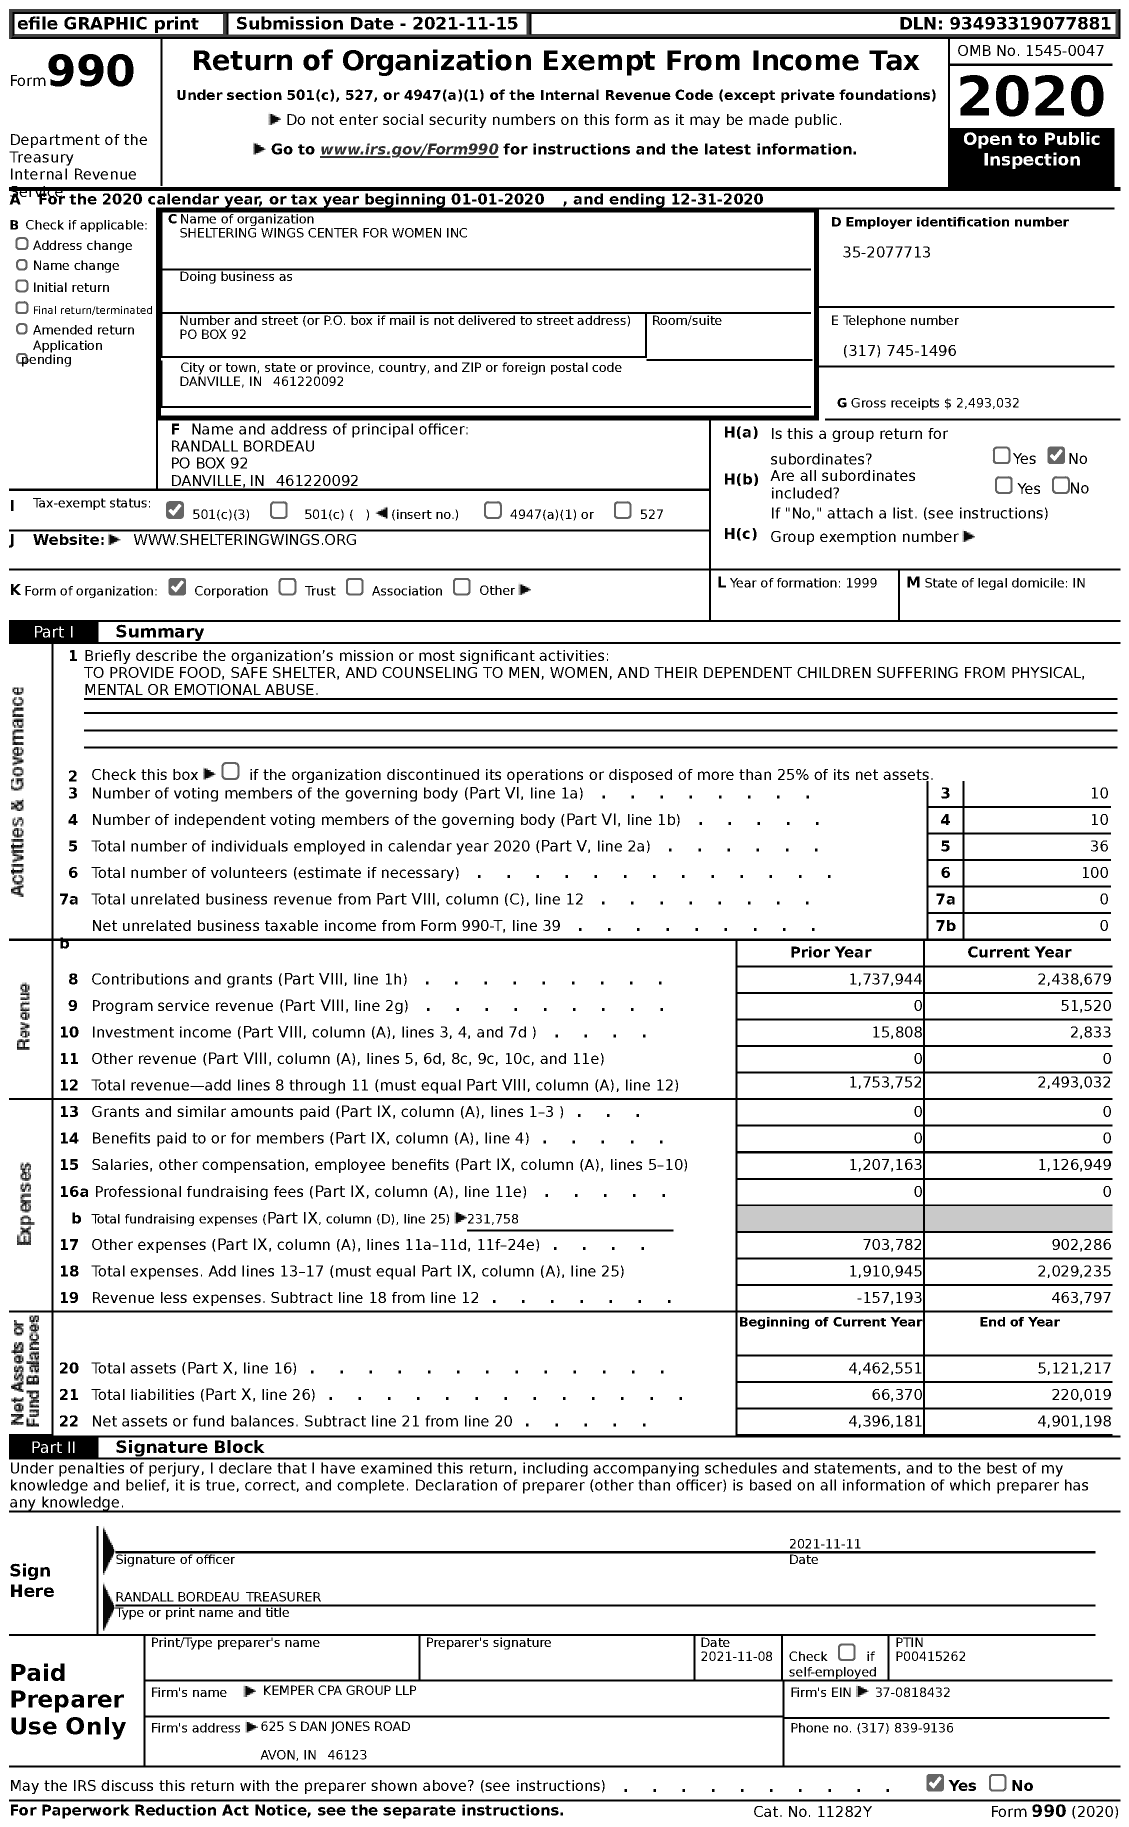 Image of first page of 2020 Form 990 for Sheltering Wings Center for Women